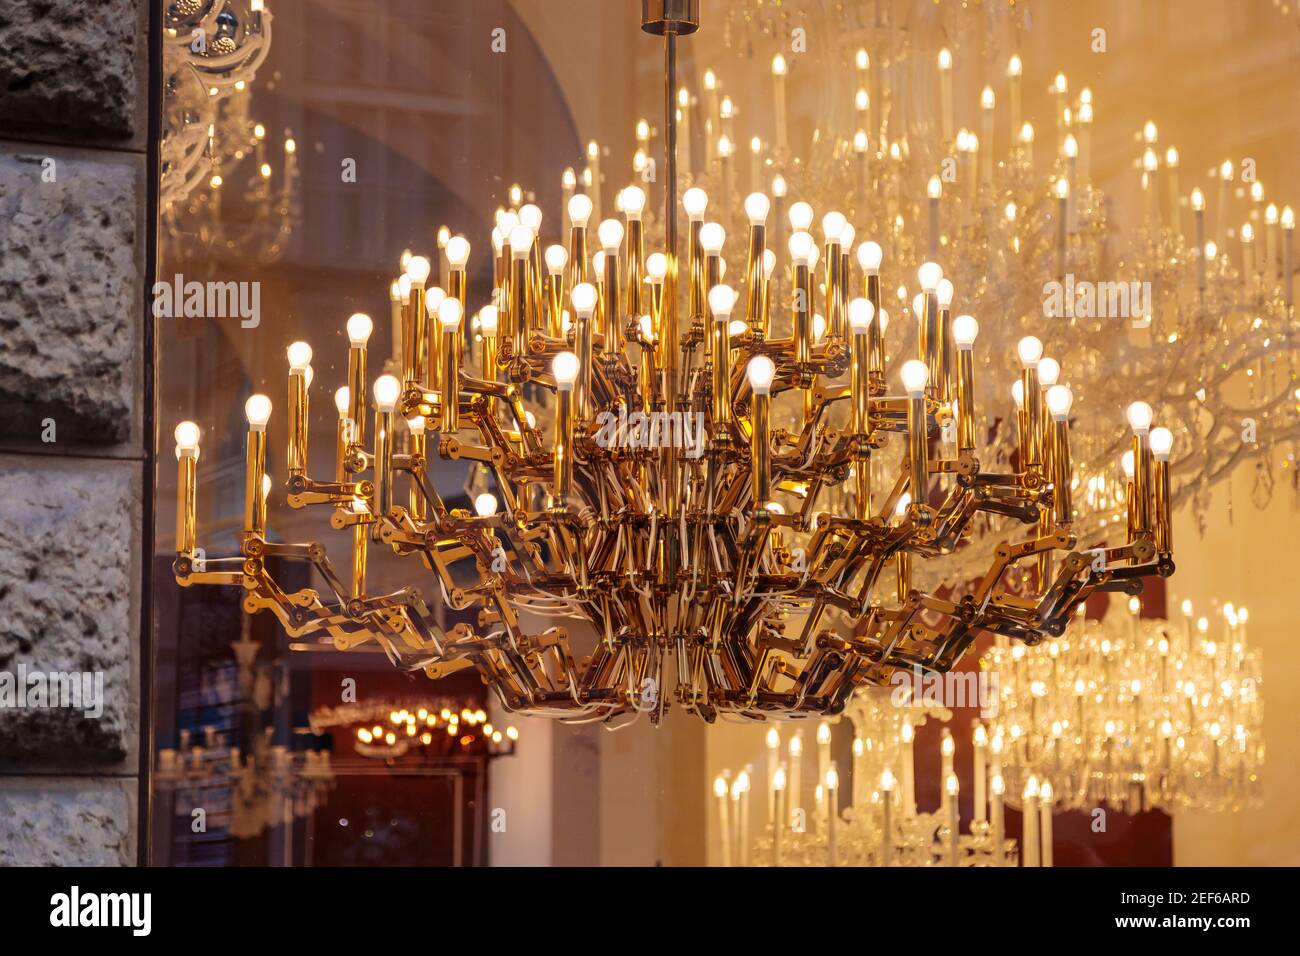 Expensive luxury large chandelier behind glass with gilding. Reflection in the shop window. Lights in the form of candles. Stock Photo